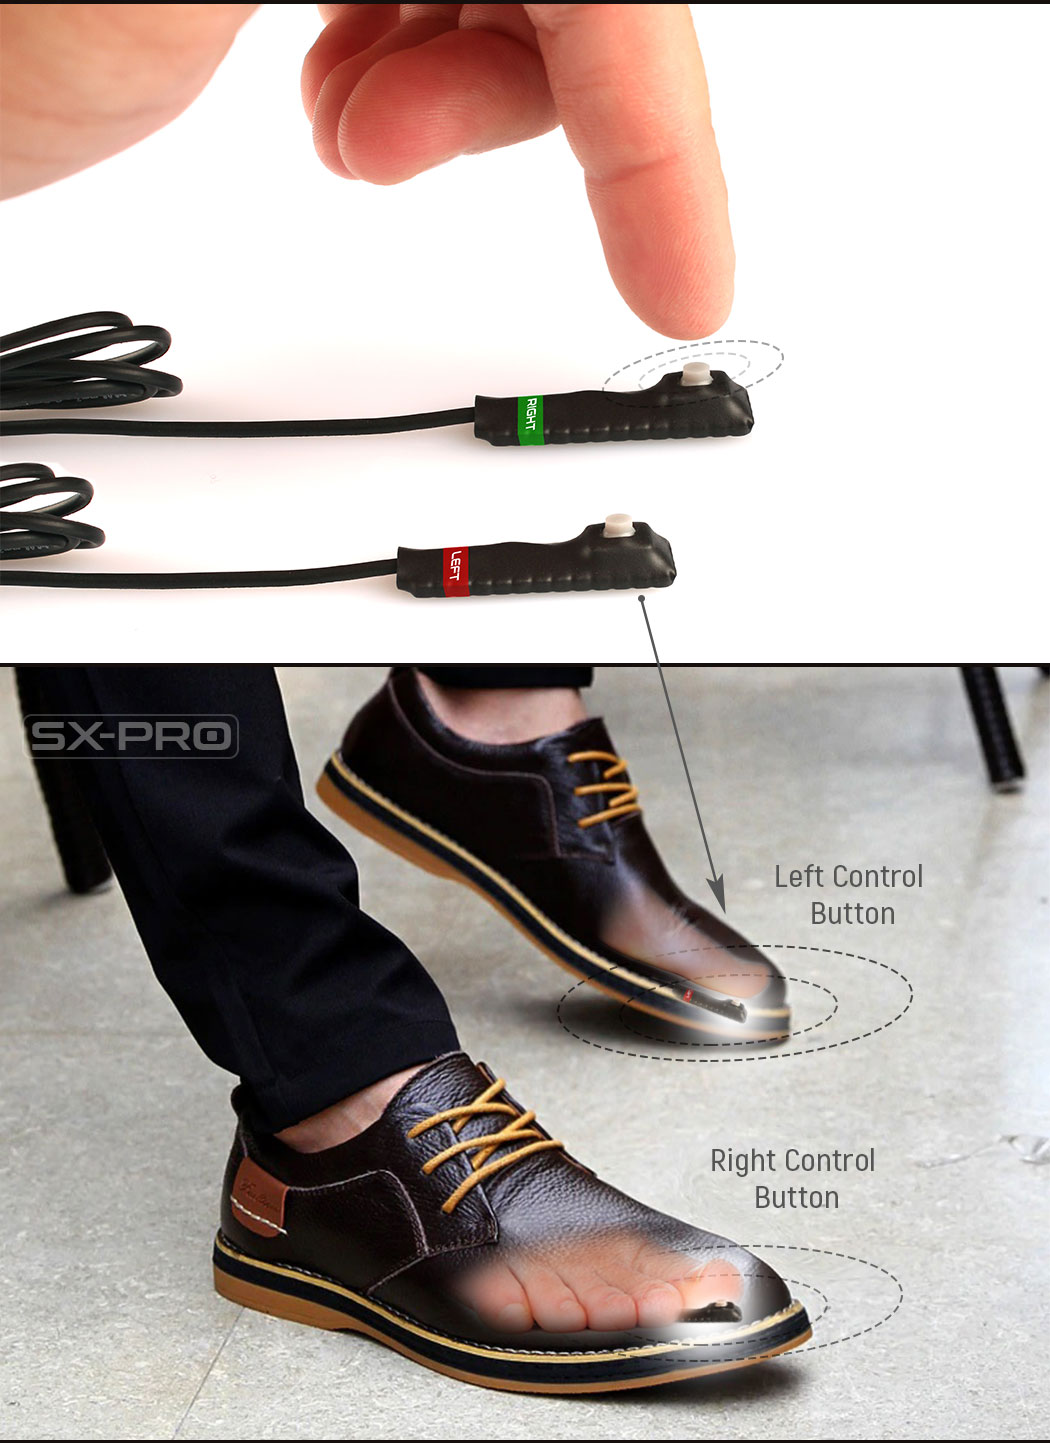 Spy earpiece Left & Right Hidden Control & Signal Buttons for exam chear and cover communication 